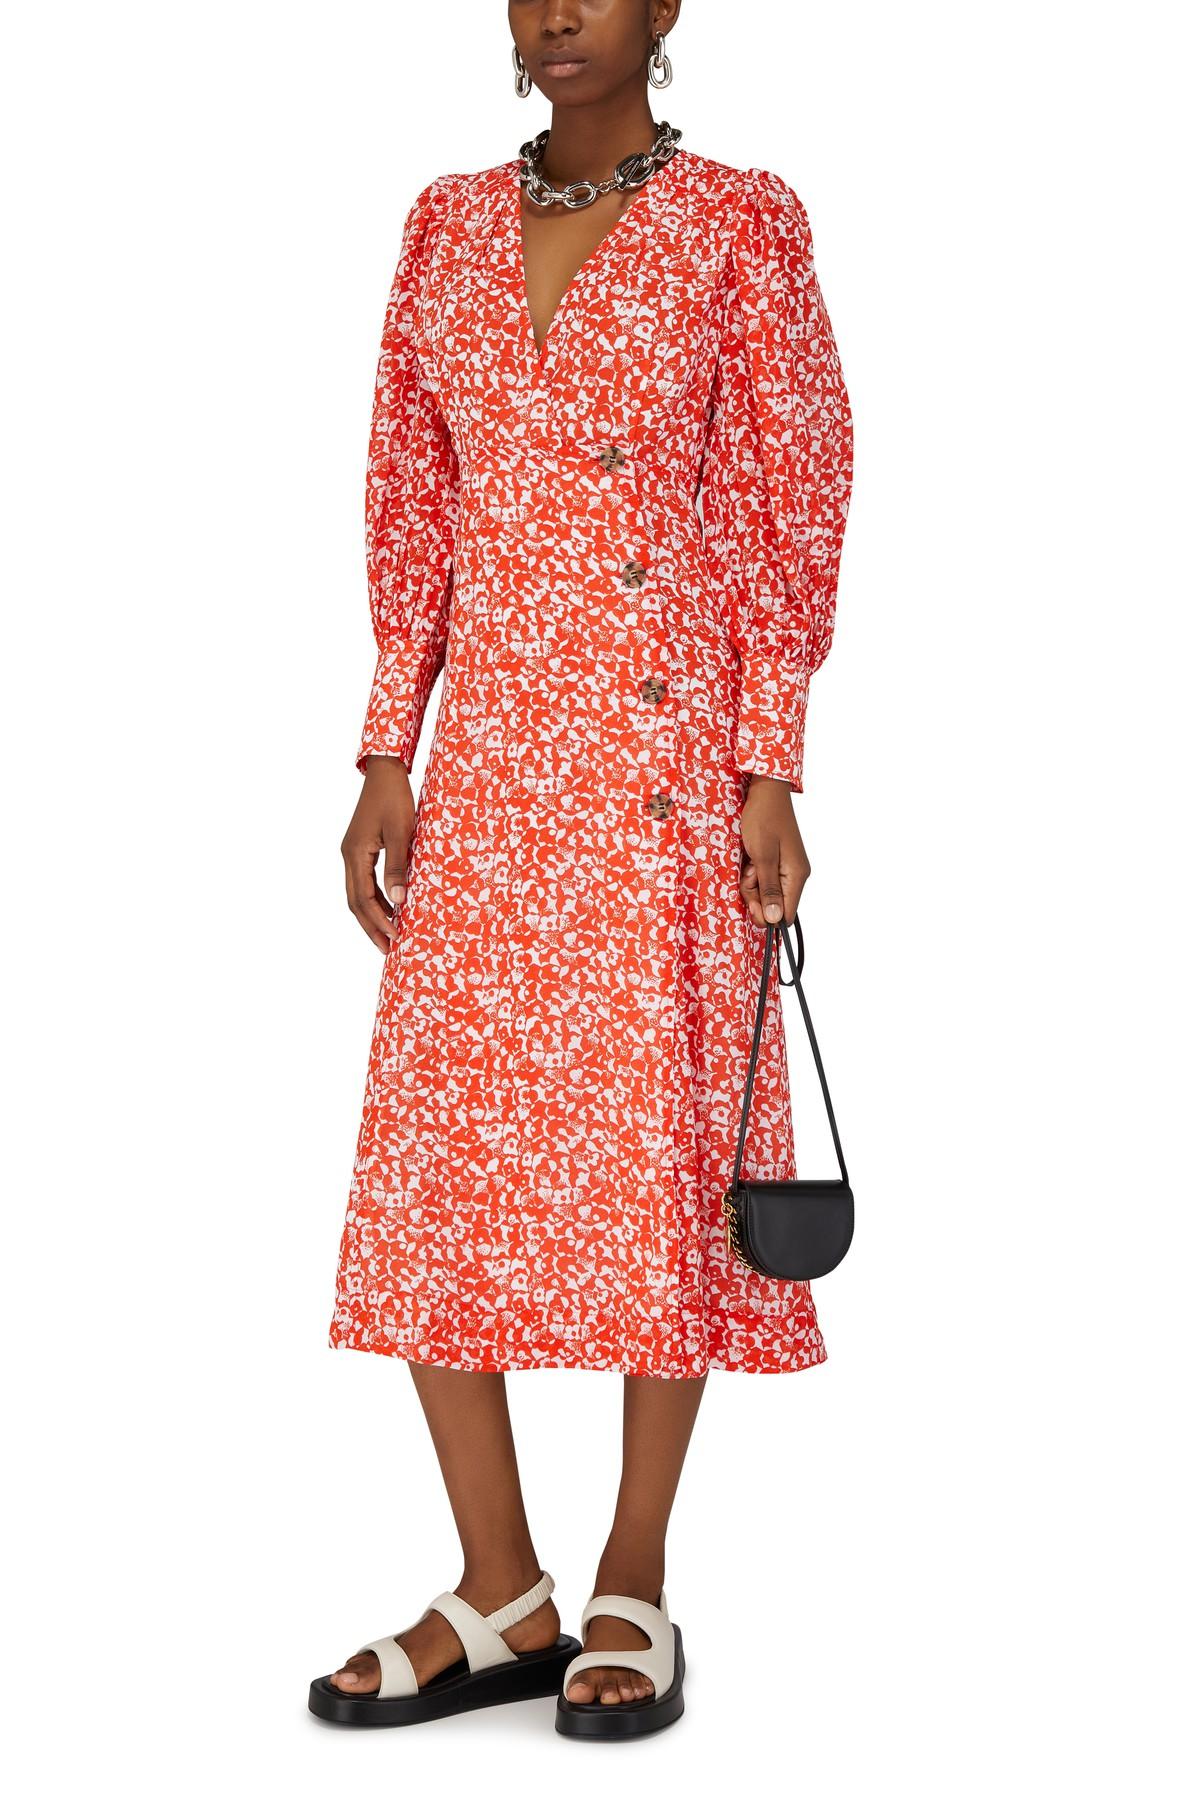 Ganni Printed Dress in Red - Save 17% | Lyst